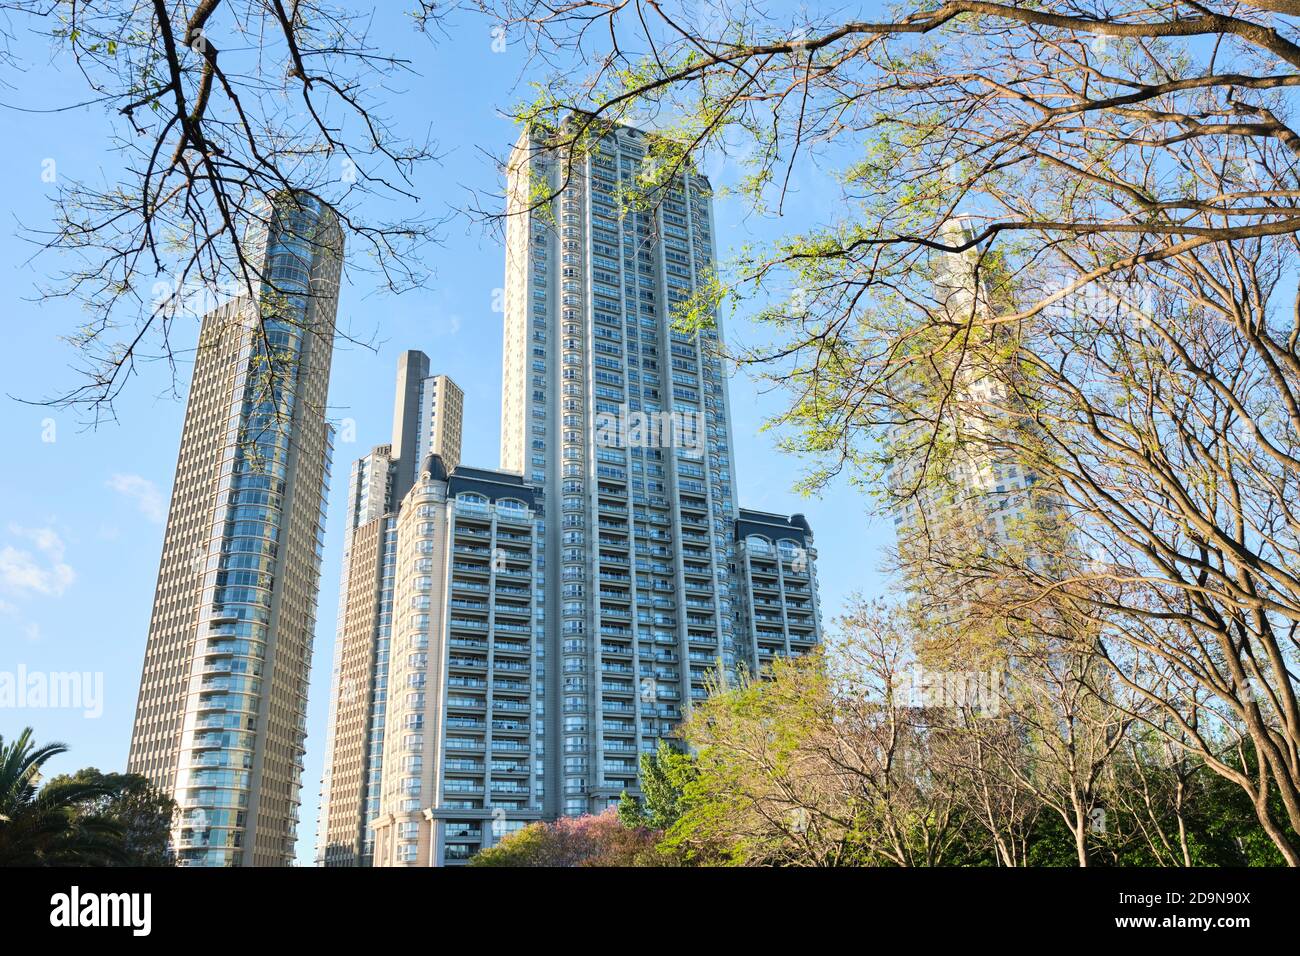 Caba, Buenos Aires / Argentina; Nov 4, 2020: Residential buildings in the most modern neighborhood of the city: Torres Mulieris, Château Puerto Madero Stock Photo